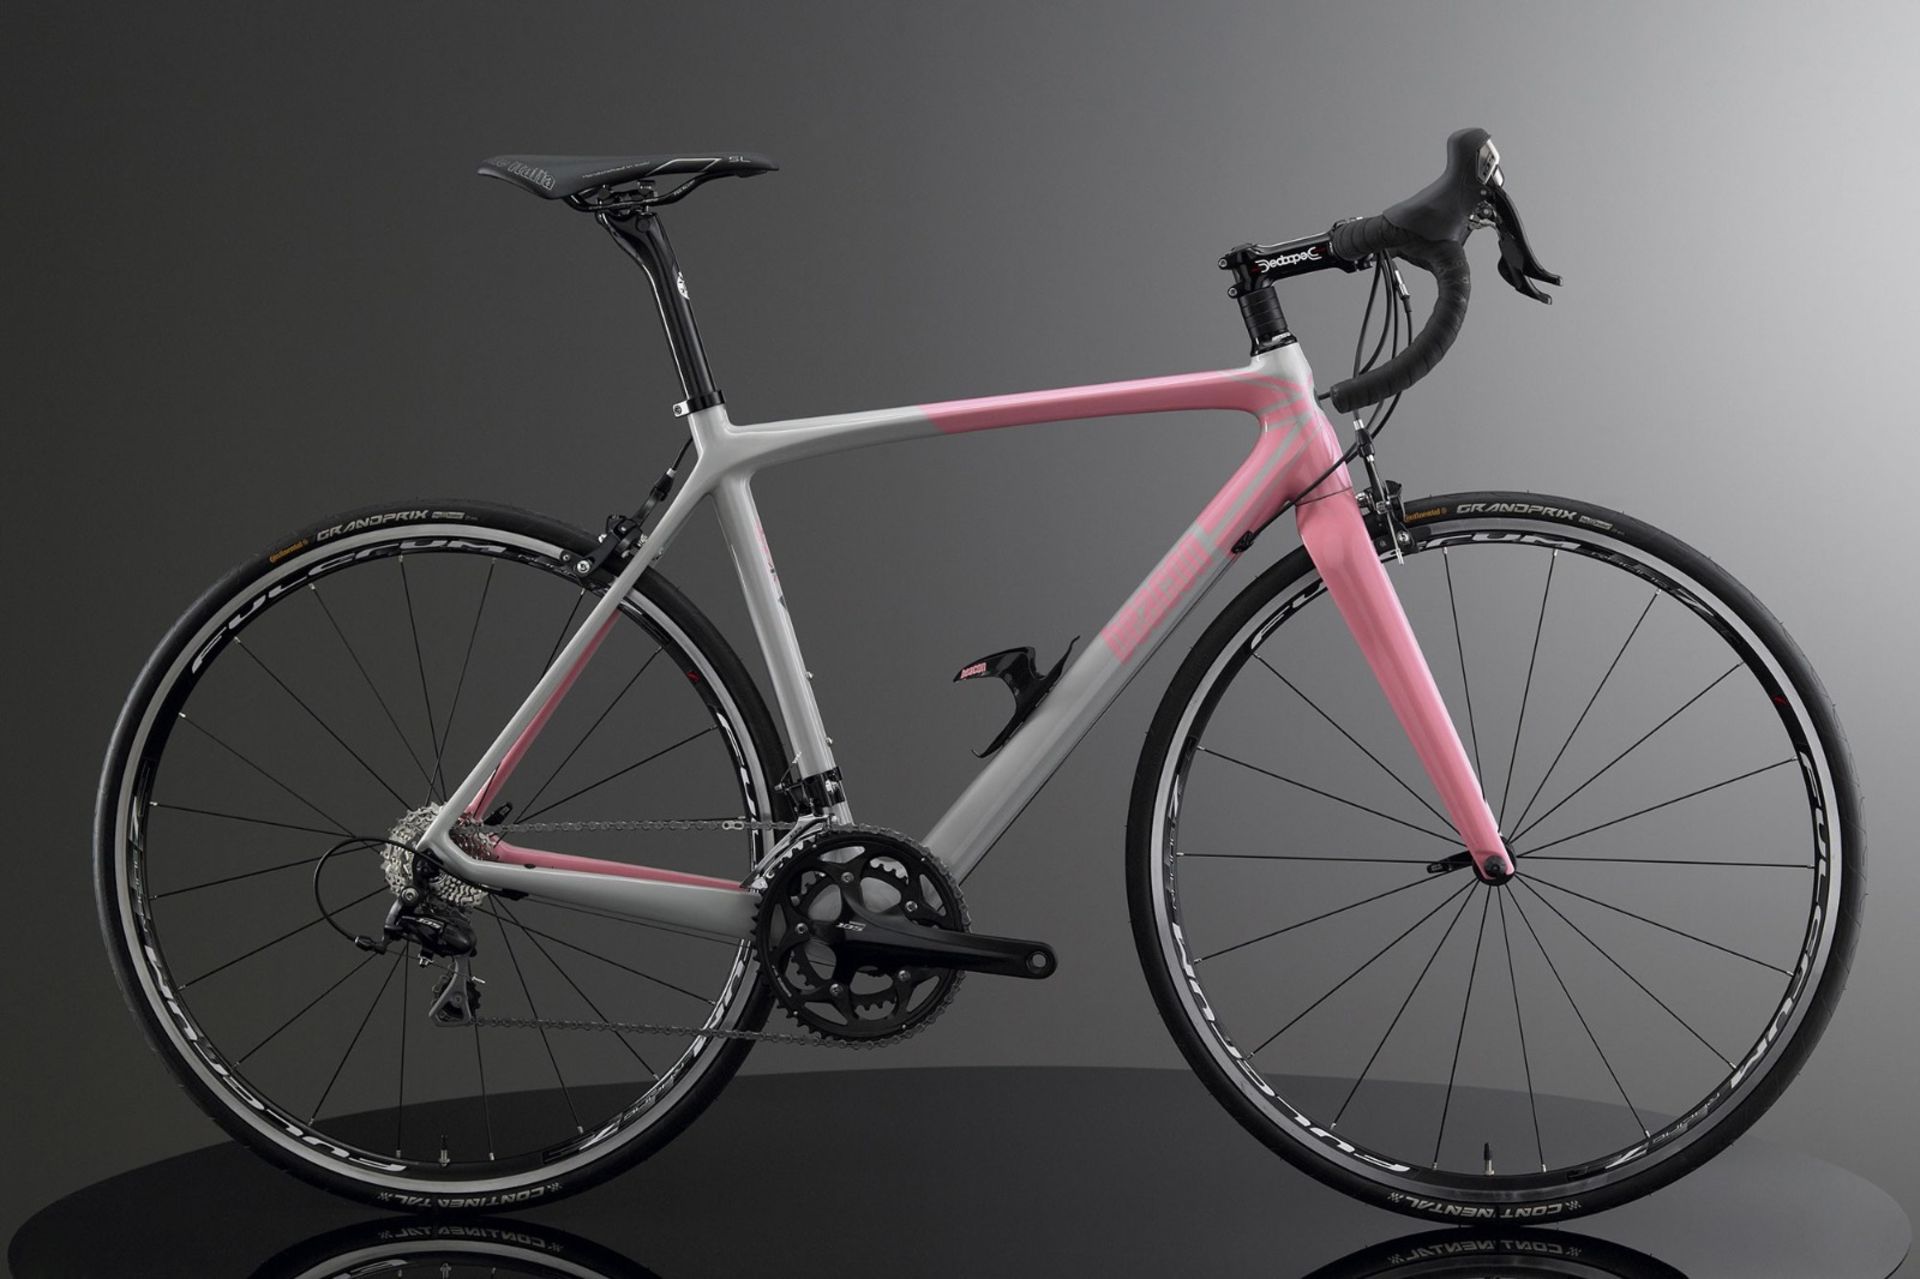 1 x Beacon Model BF-70, Size 520, Carbon Fibre Bike Frame in Grey & Pink. - Image 2 of 3